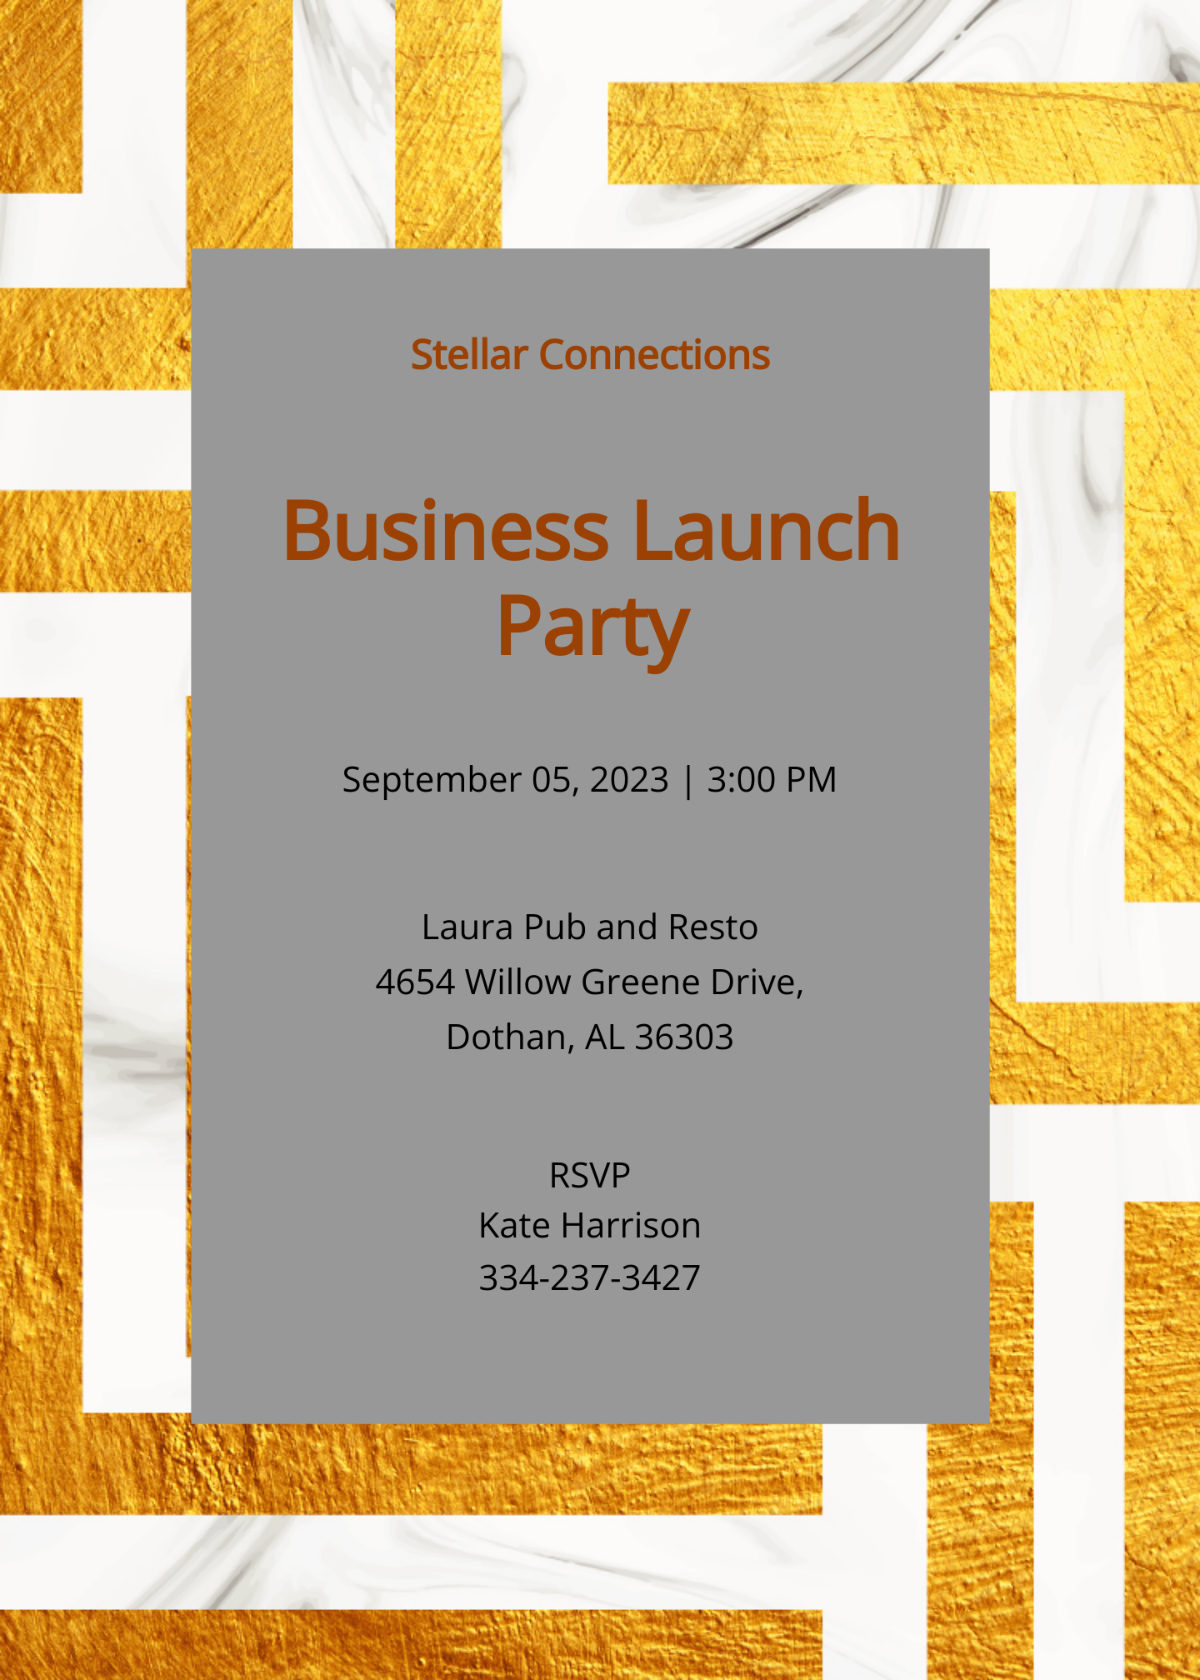 Business Launch Party Invitation Template